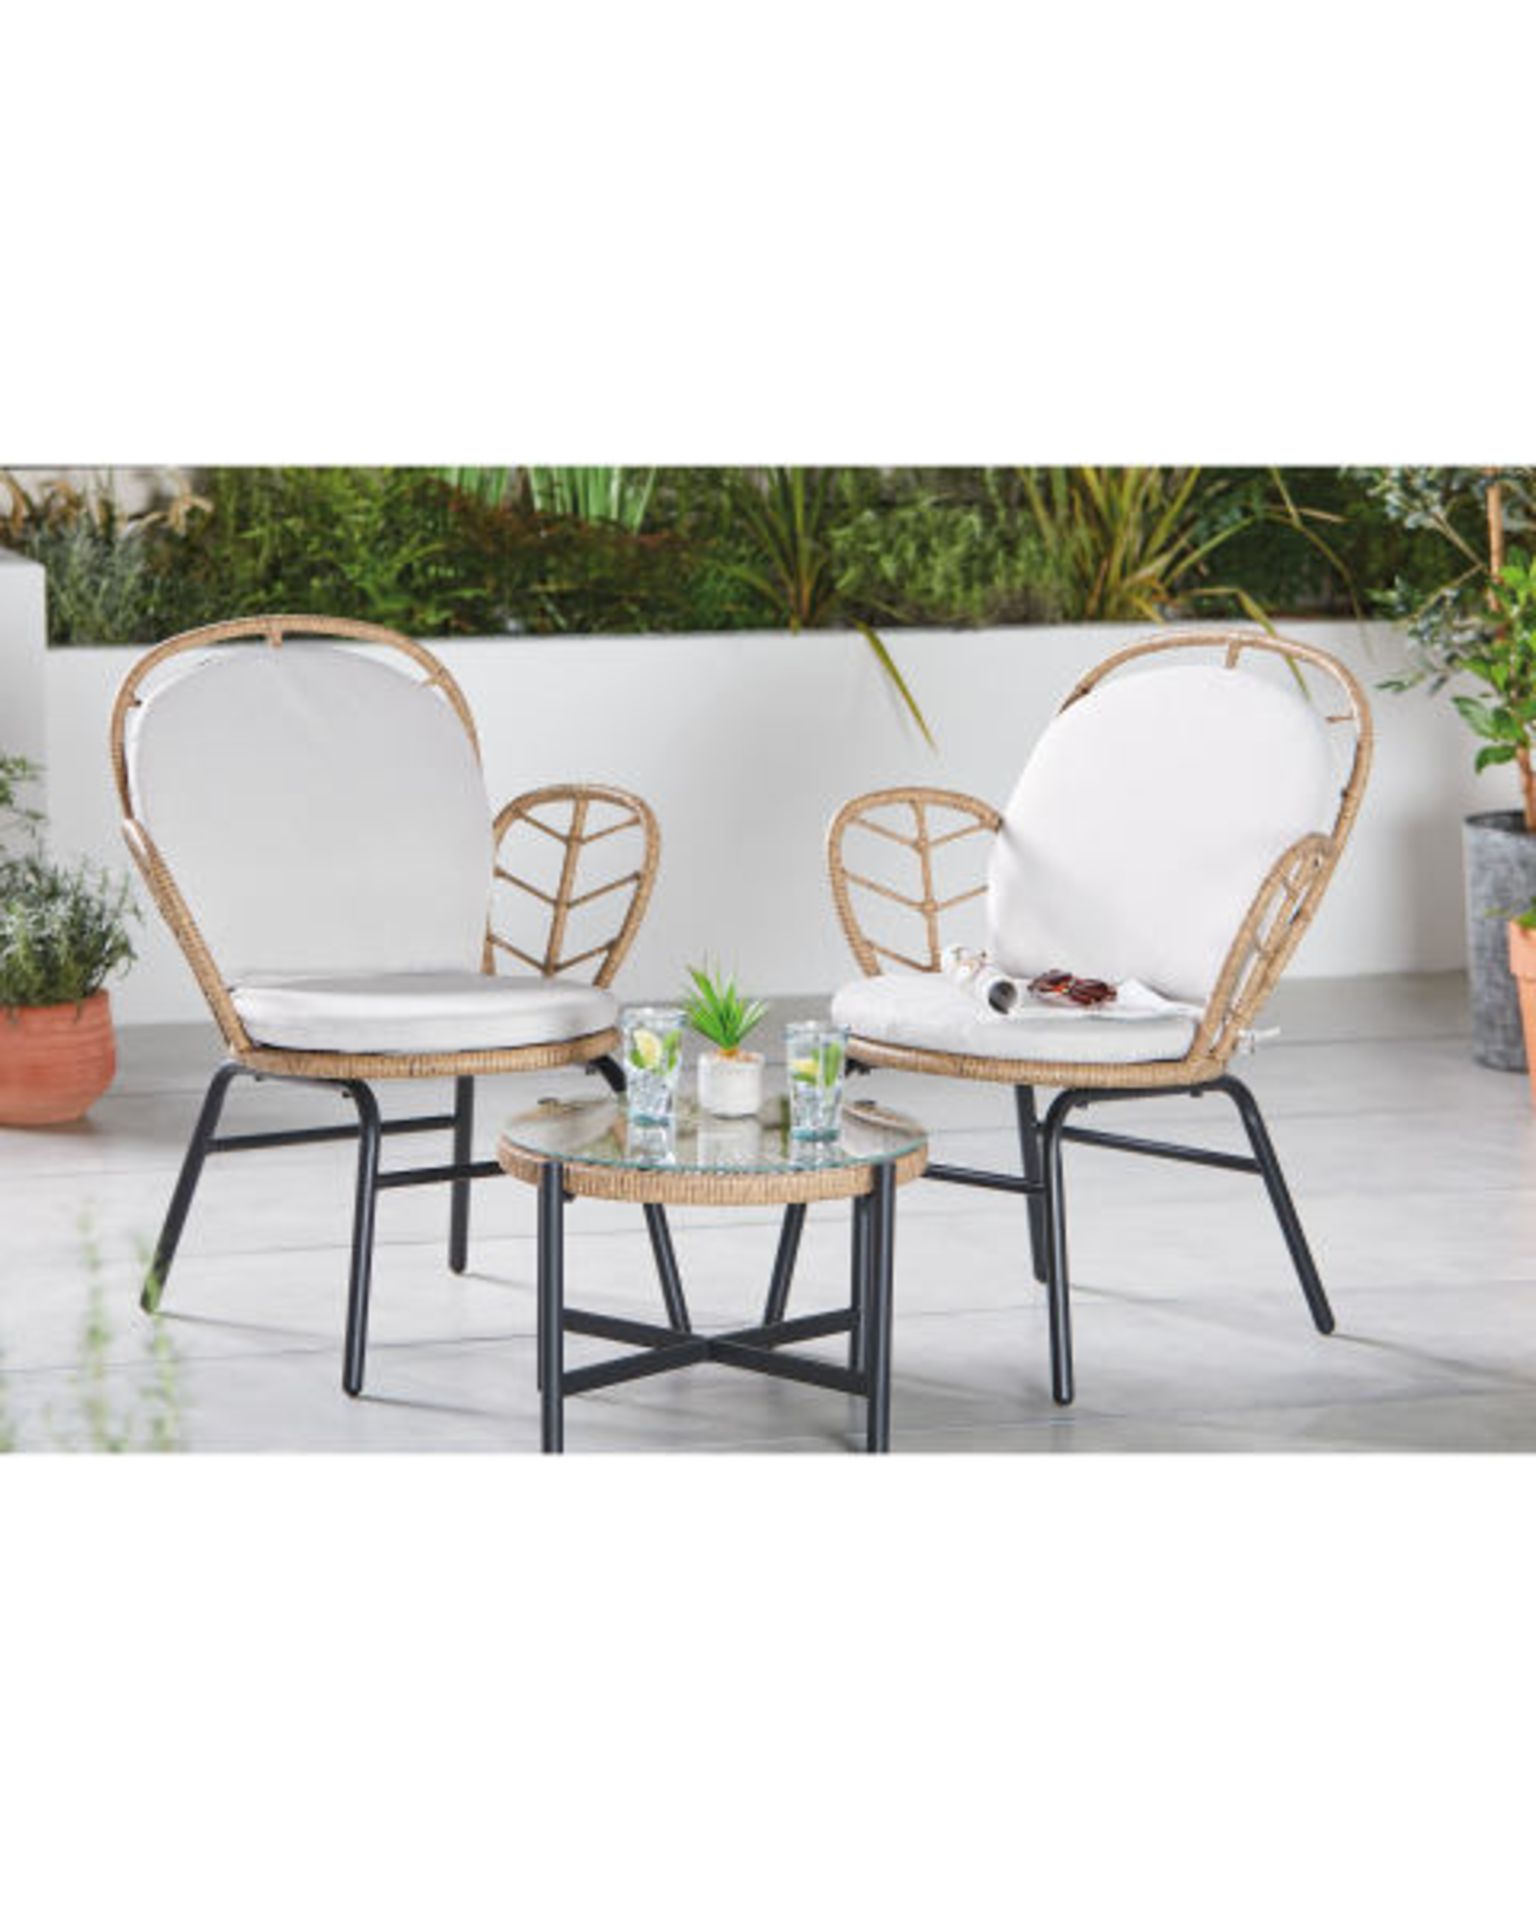 Luxury Petal Rattan Bistro Set. Transform your garden and create a space where you can relax with - Image 4 of 5